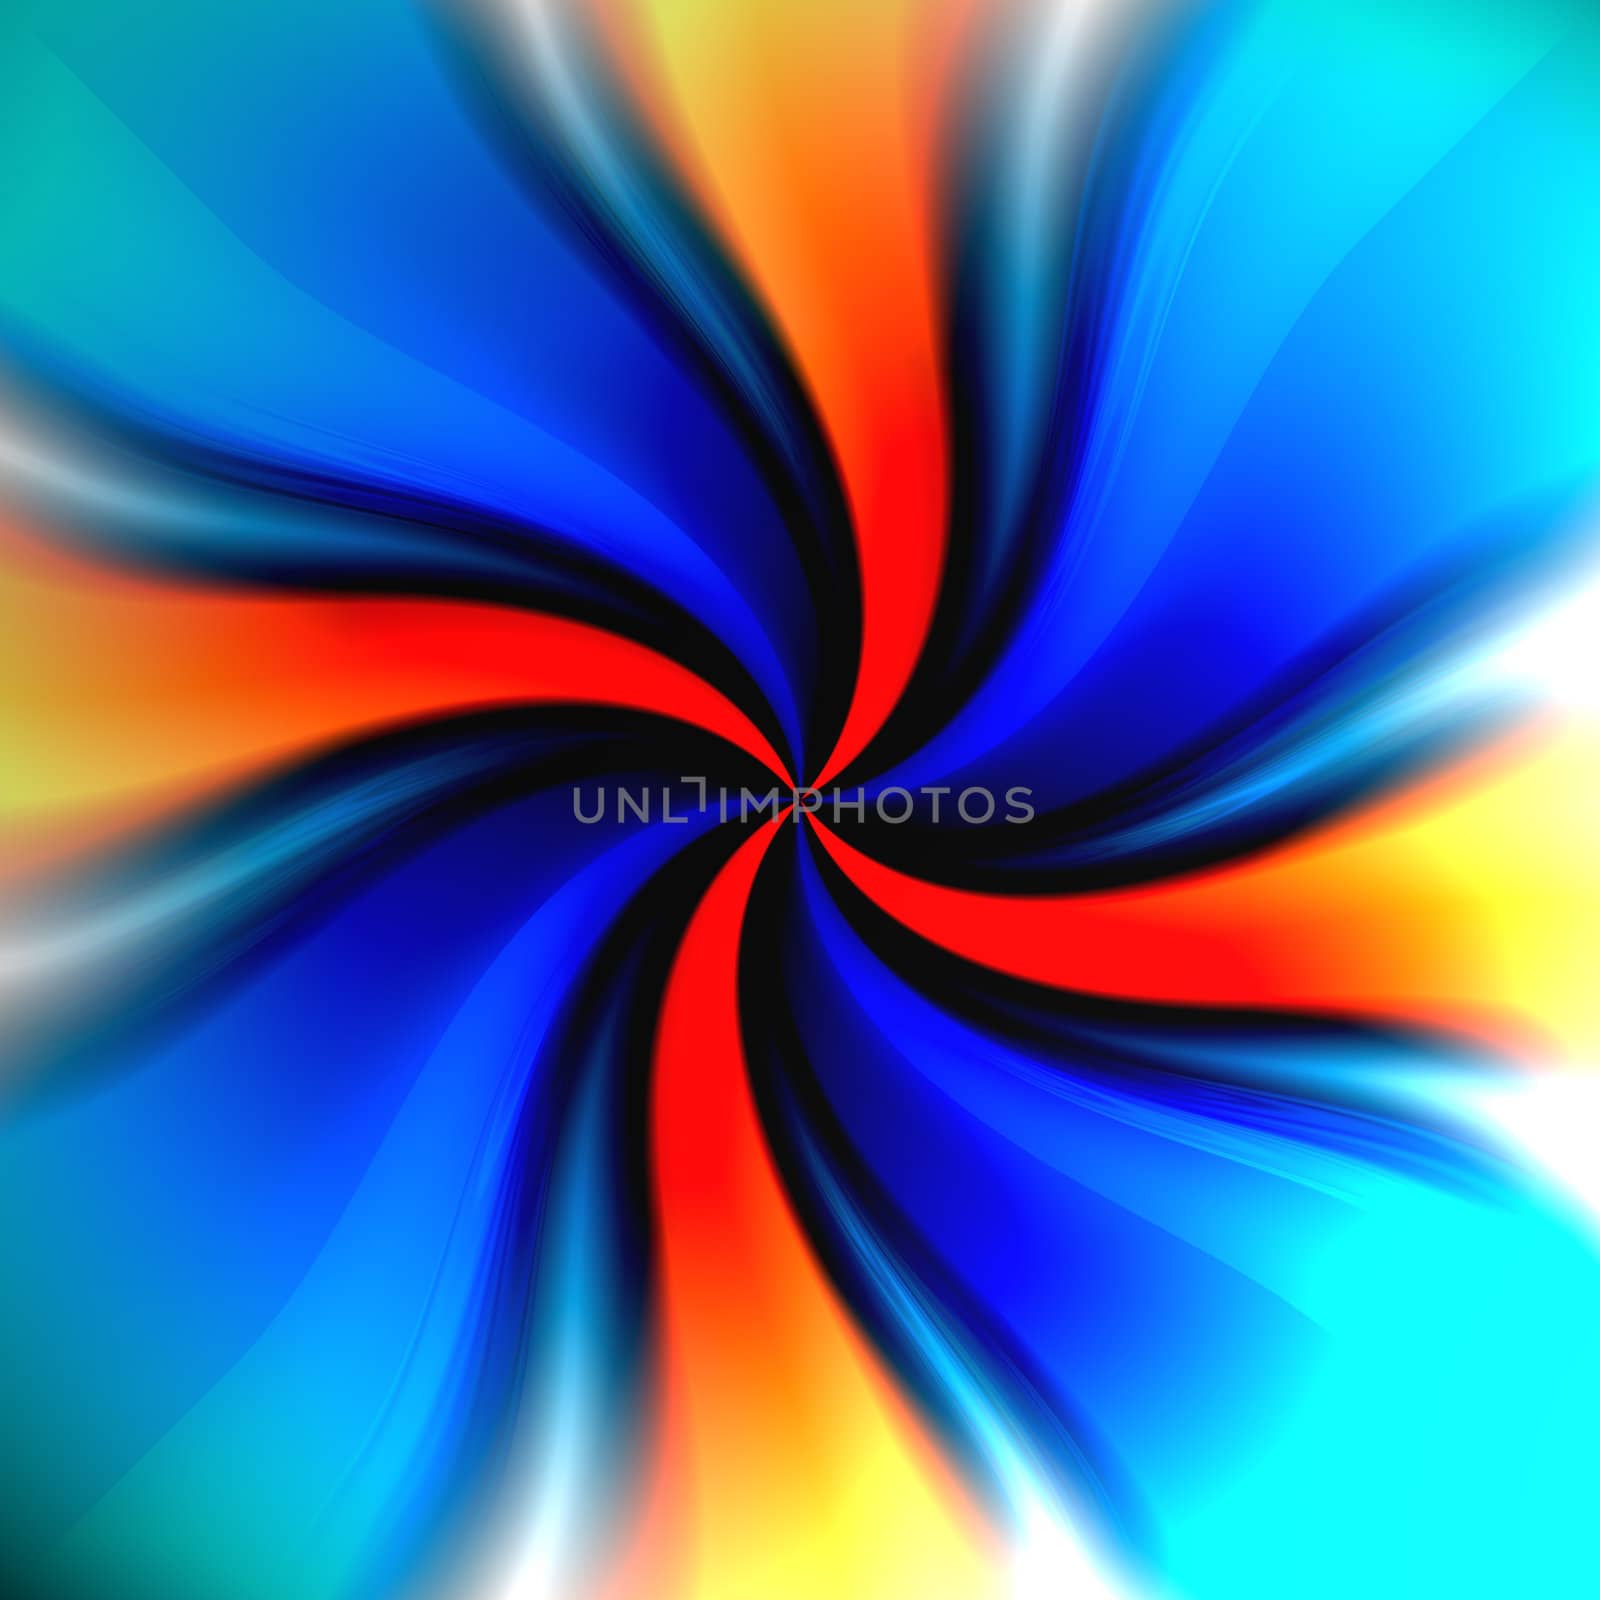 A colorful spiraling vortex background with a variety of colors.